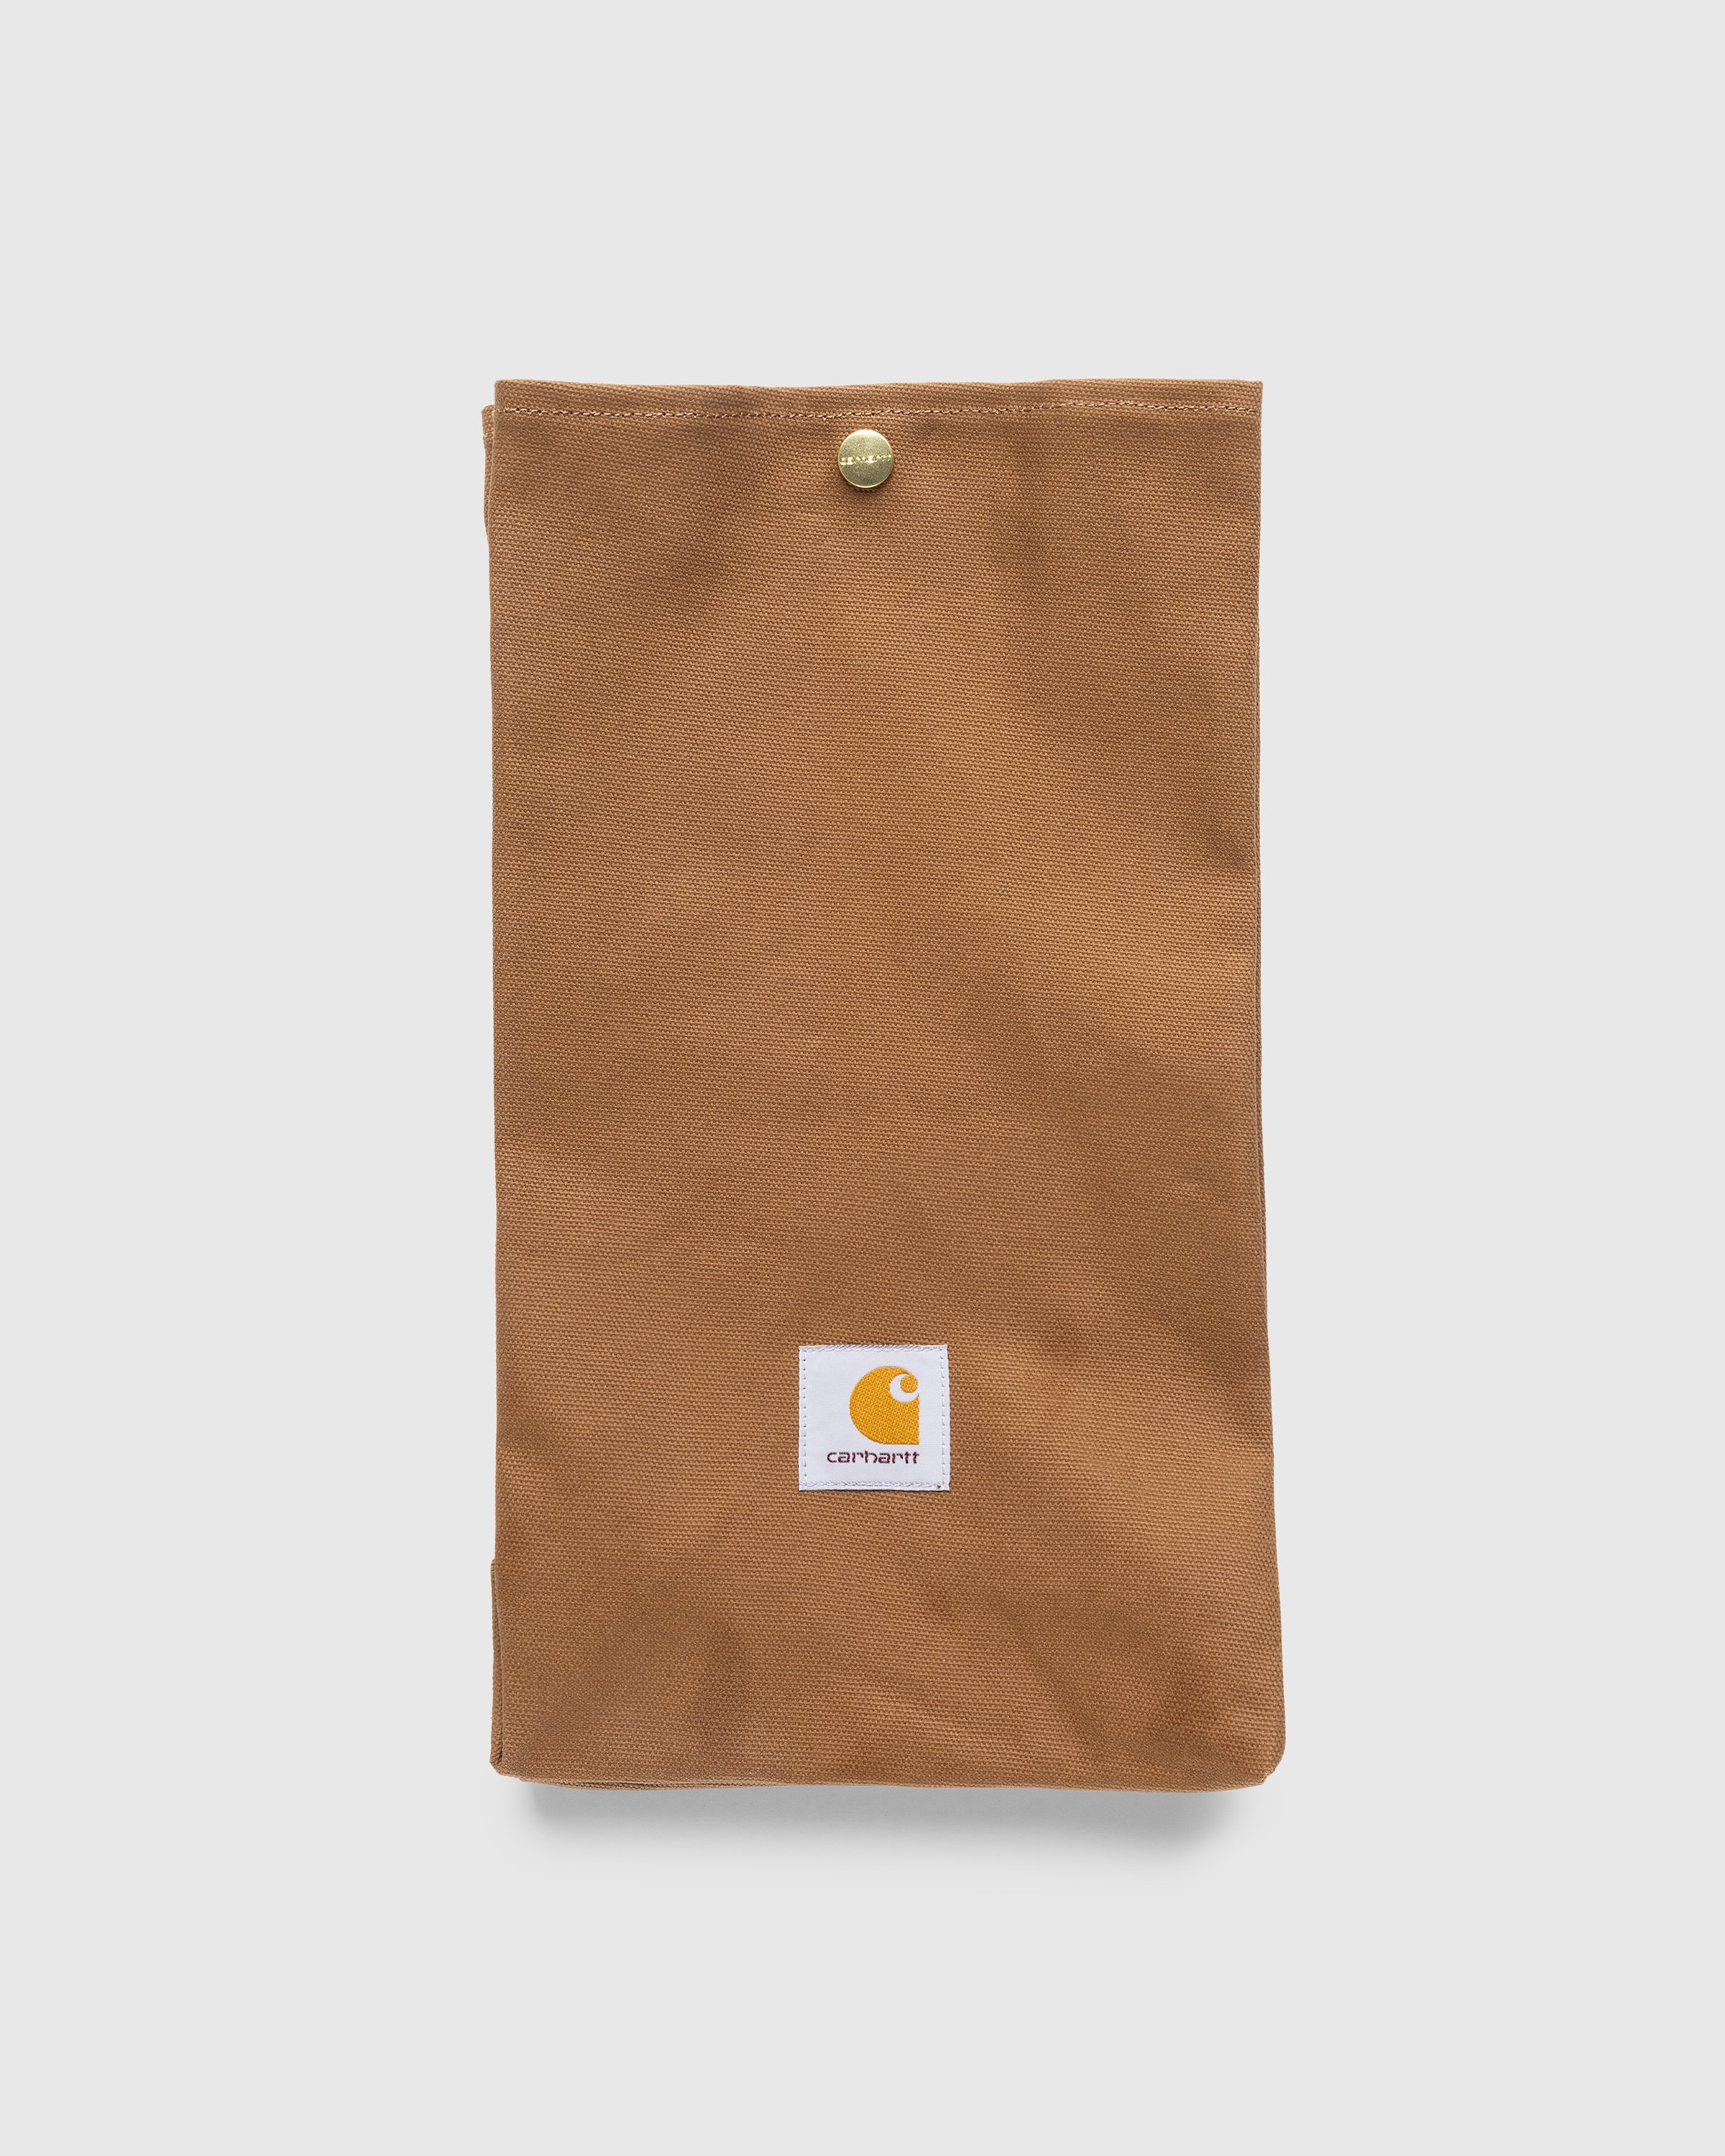 Carhartt WIP - Lunch Bag Hamilton Brown - Lifestyle - Brown - Image 2